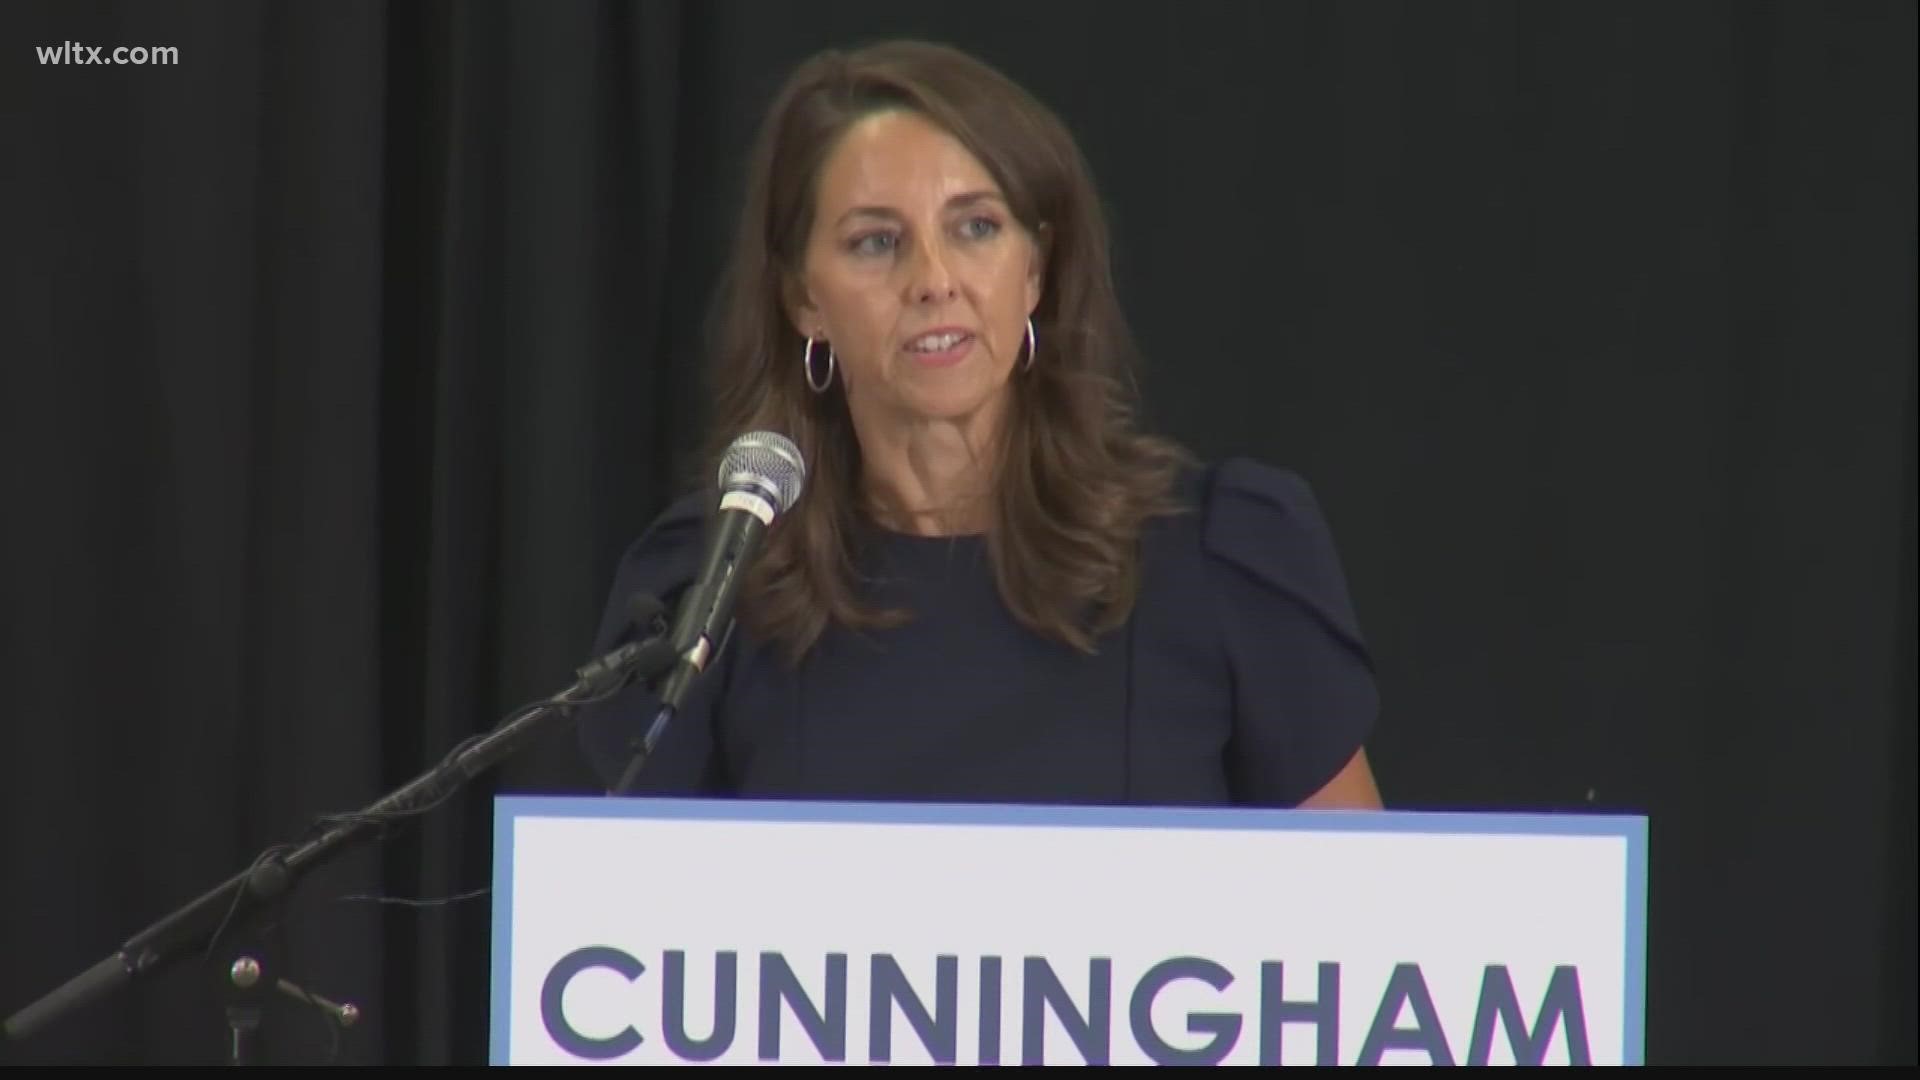 Joe Cunningham has chosen Tally Parham Casey, a civil litigator who flew fighter jets during three combat tours over Iraq, to be his running mate.